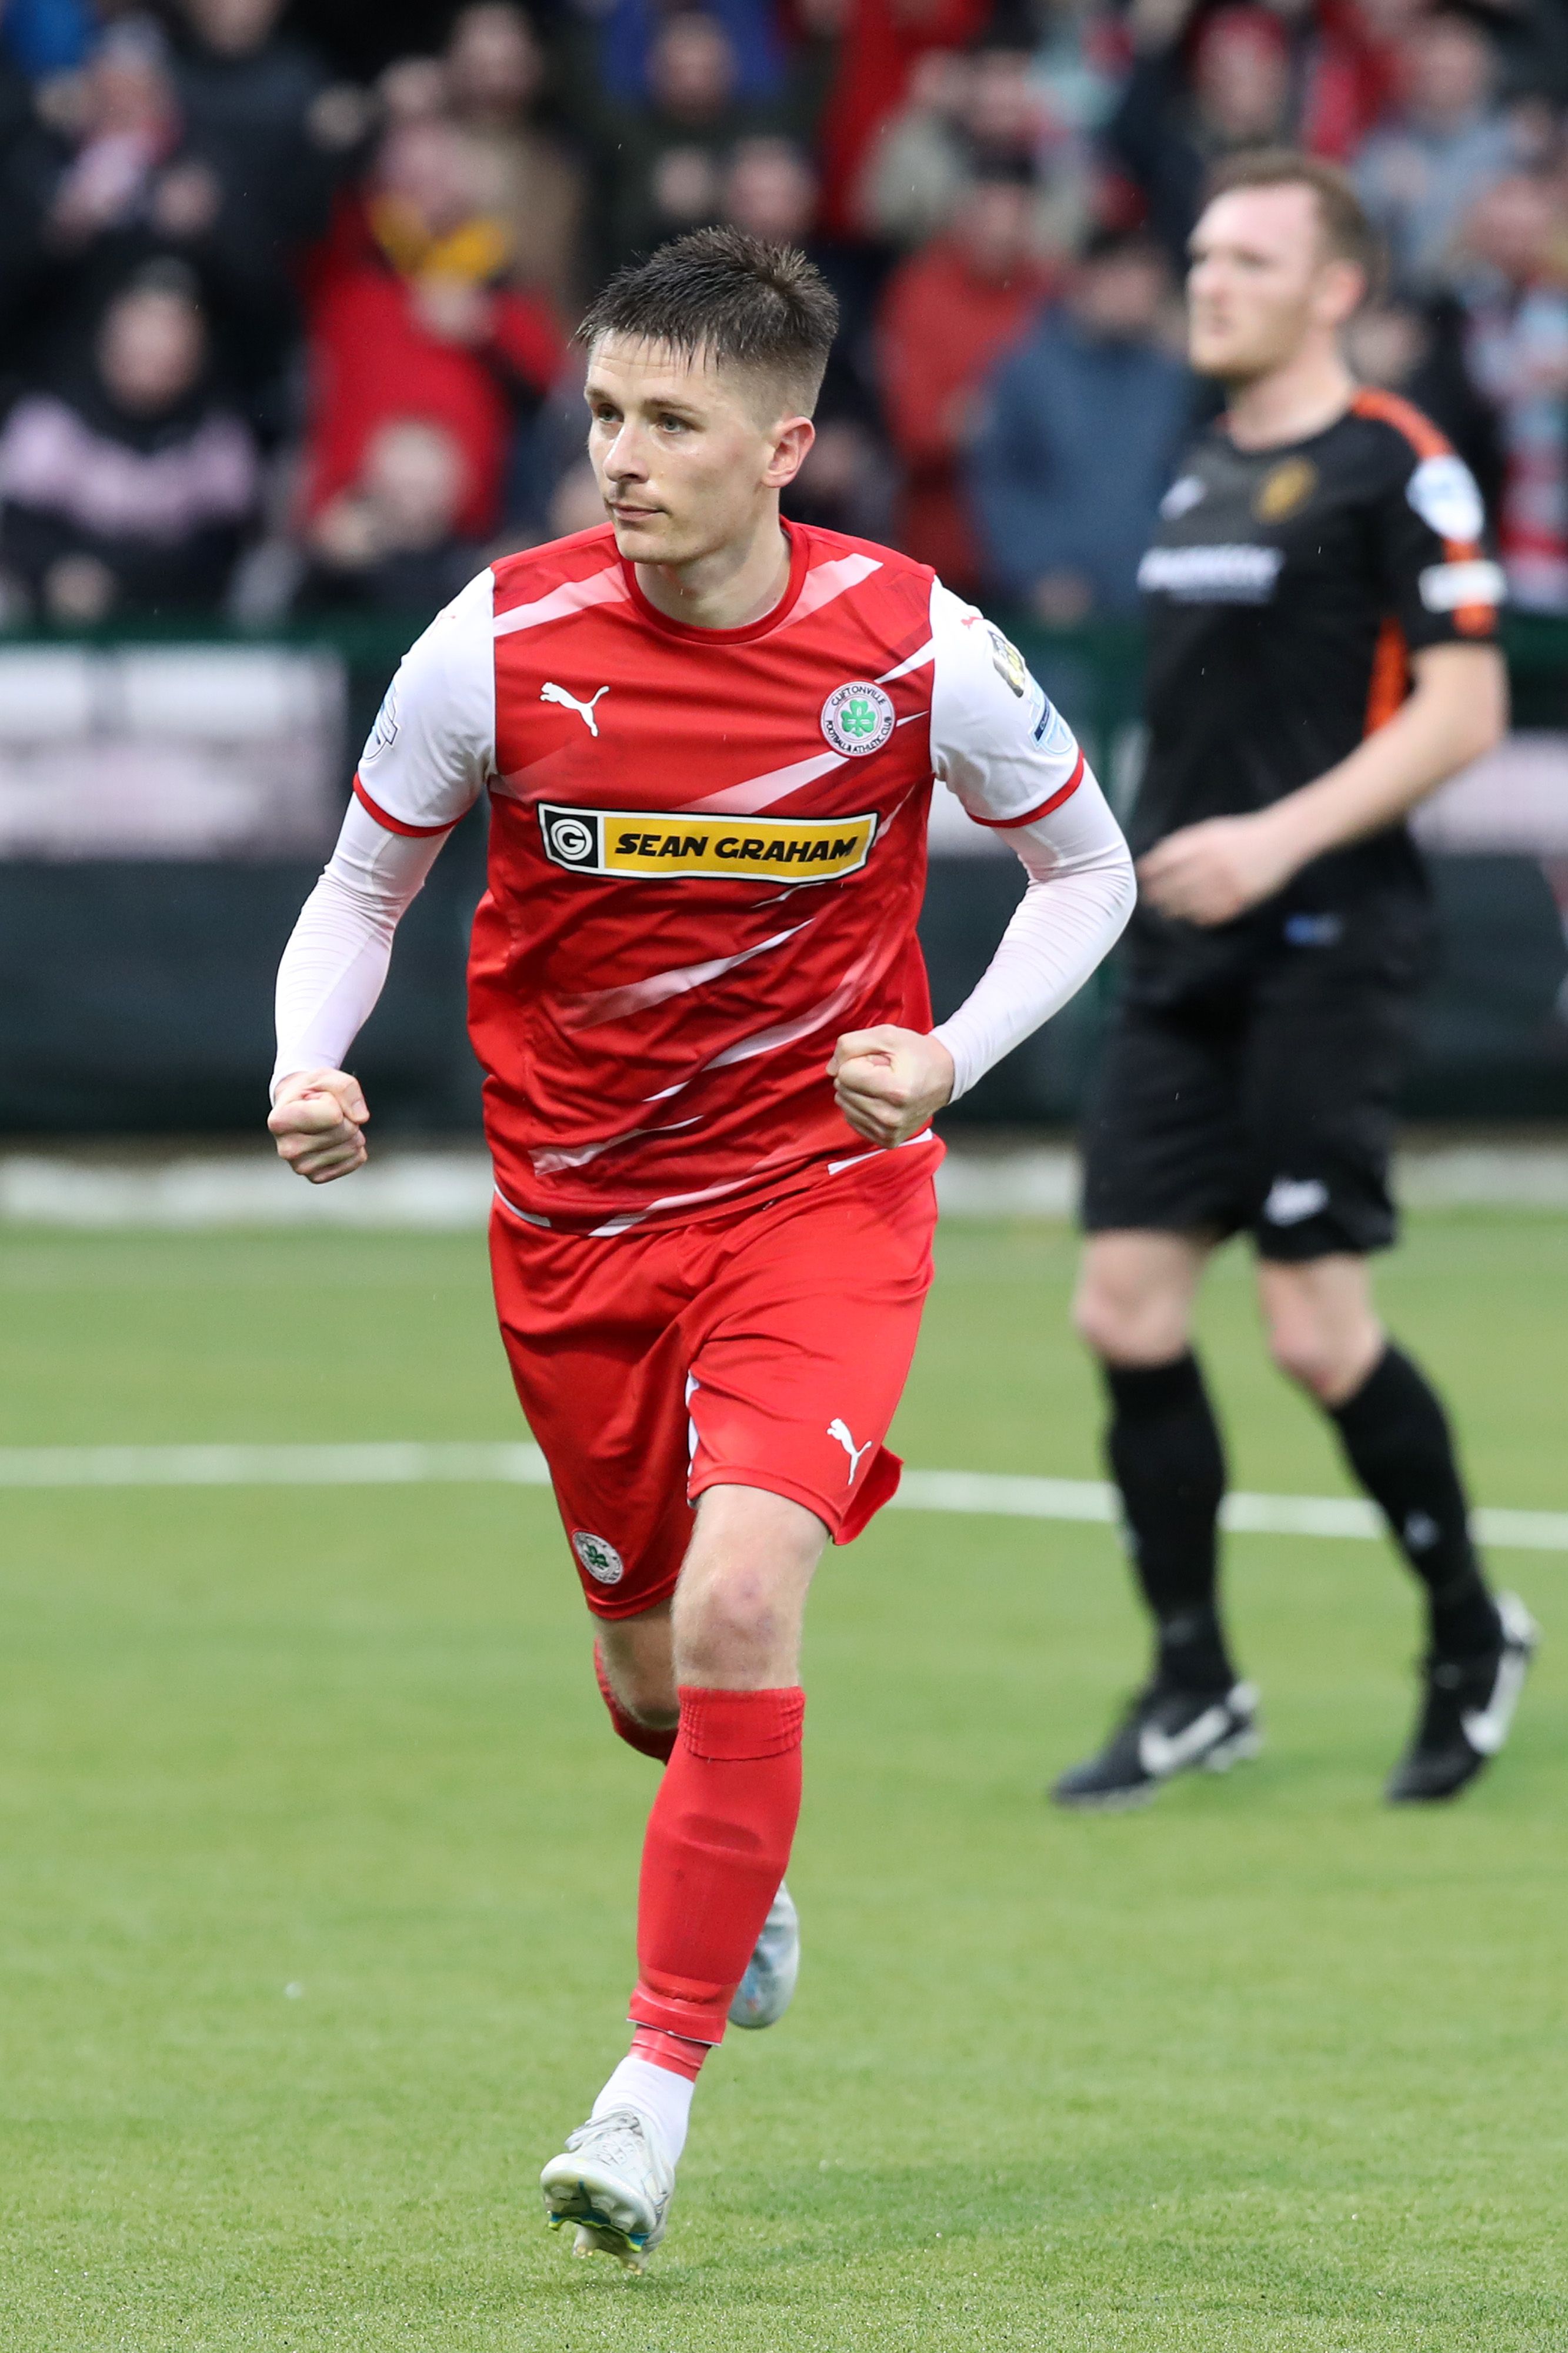 Ryan Curran scored both Cliftonville goals on Saturday 